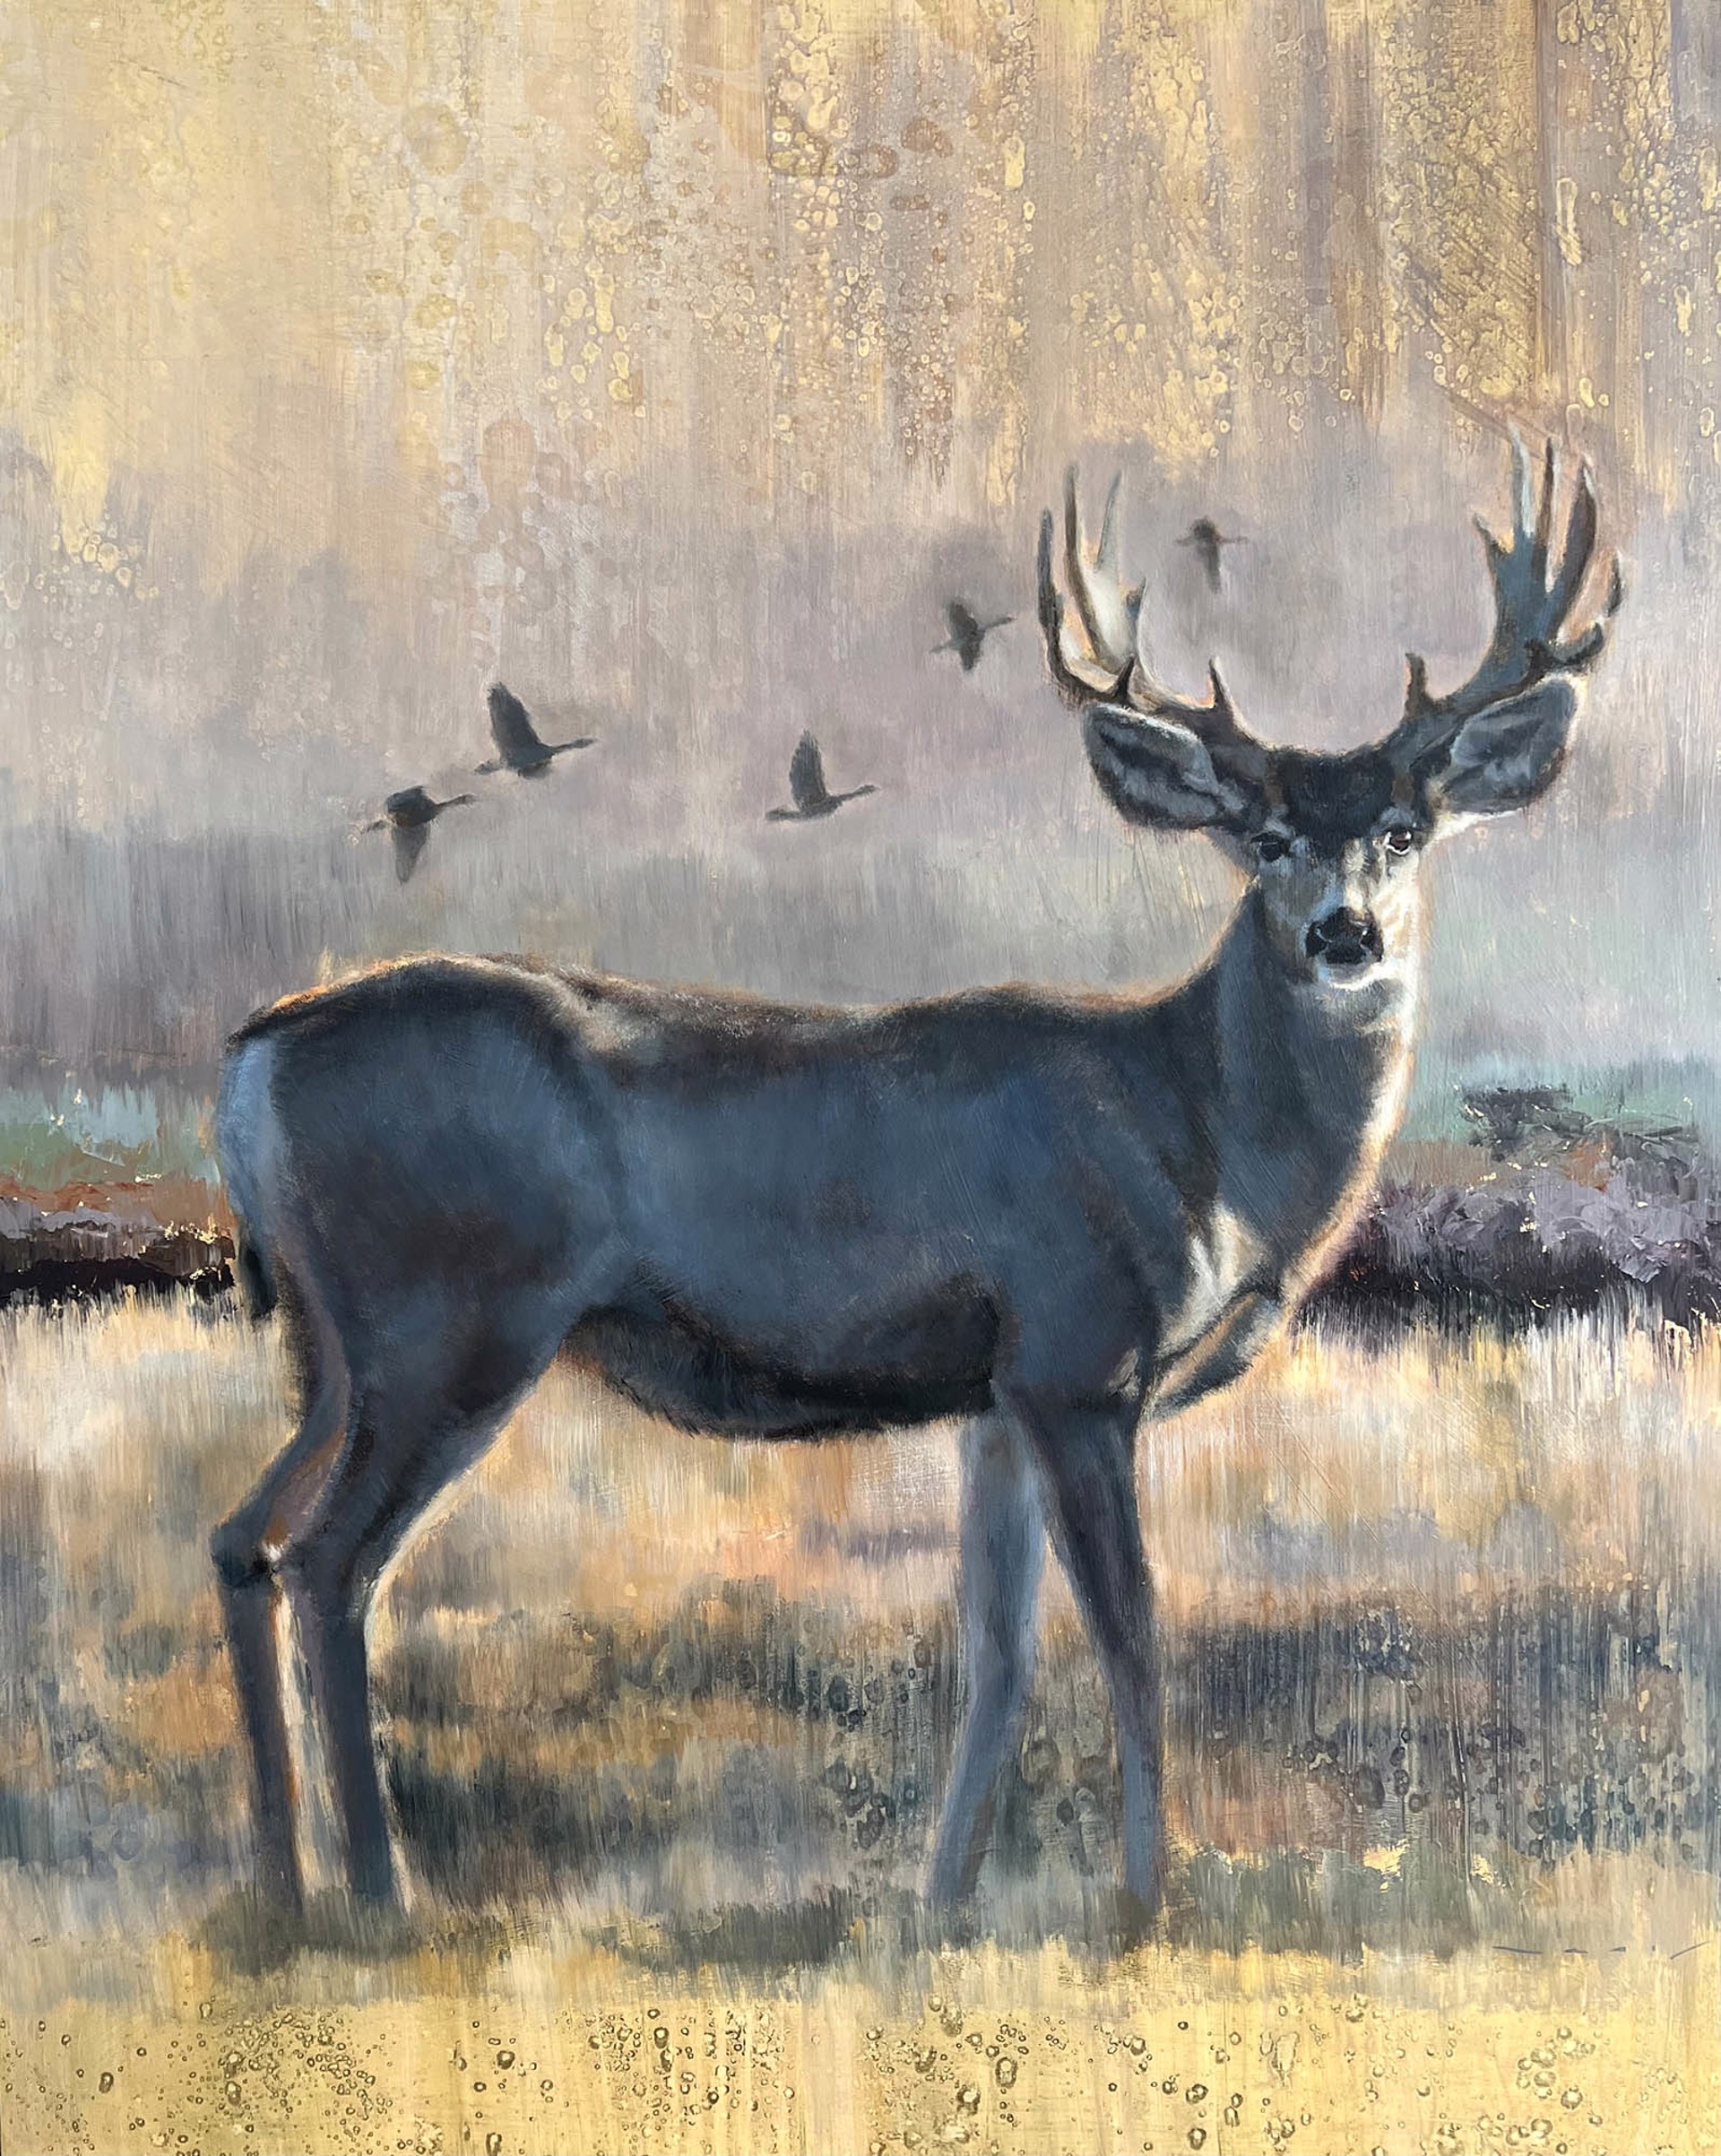 Original Mixed Media Painting By Nealy Riley Featuring A Buck Deer Walking Across Abstracted Landscape